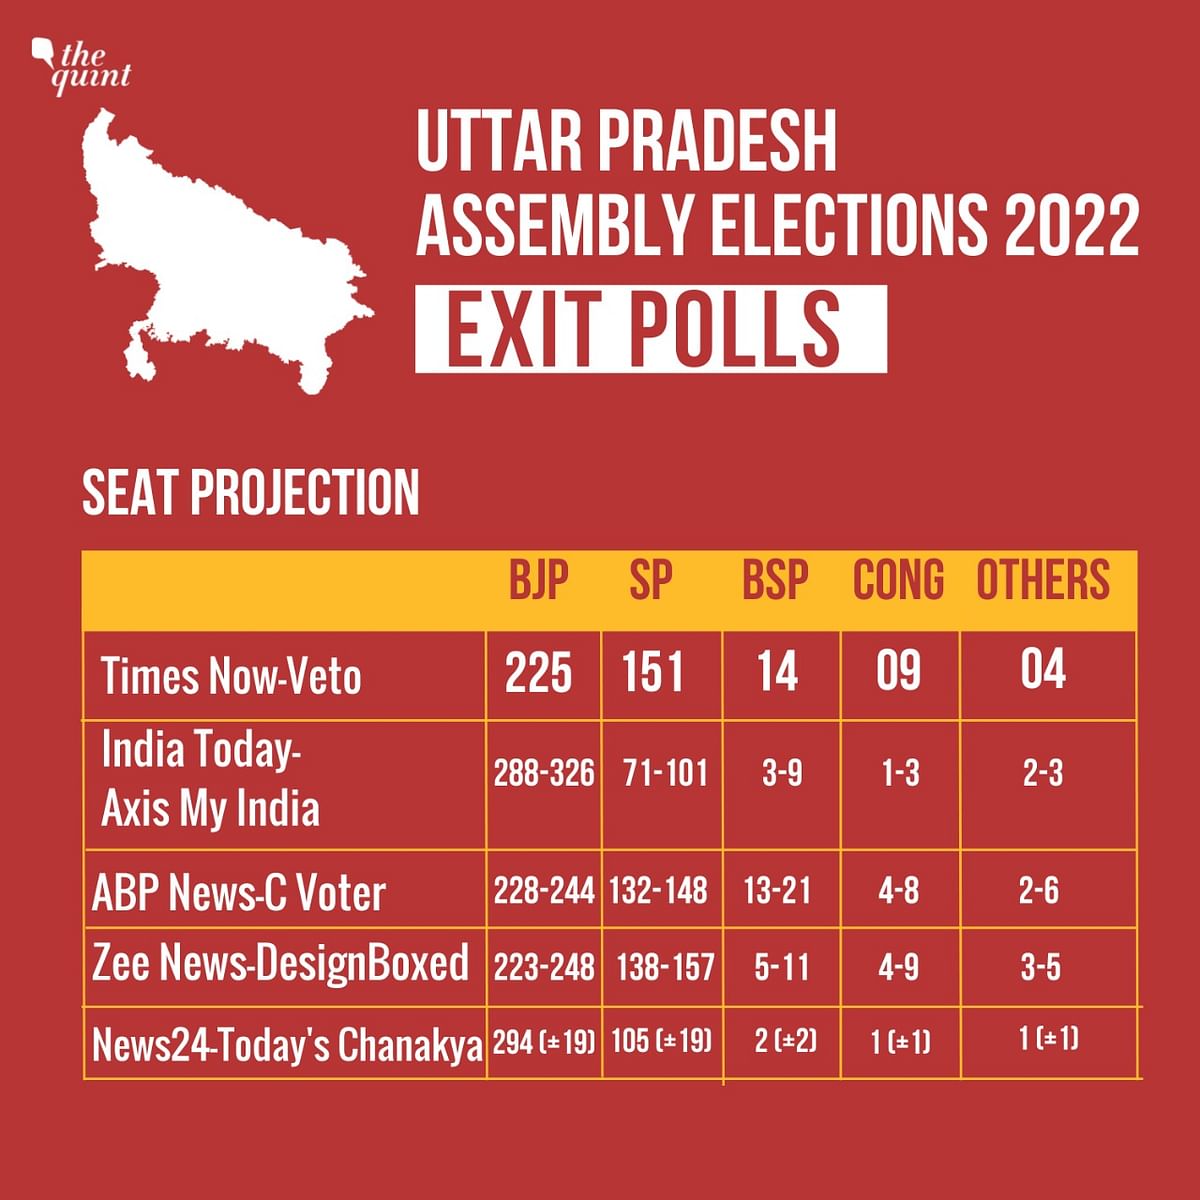 Catch the exit poll results for Uttar Pradesh Assembly Elections here.